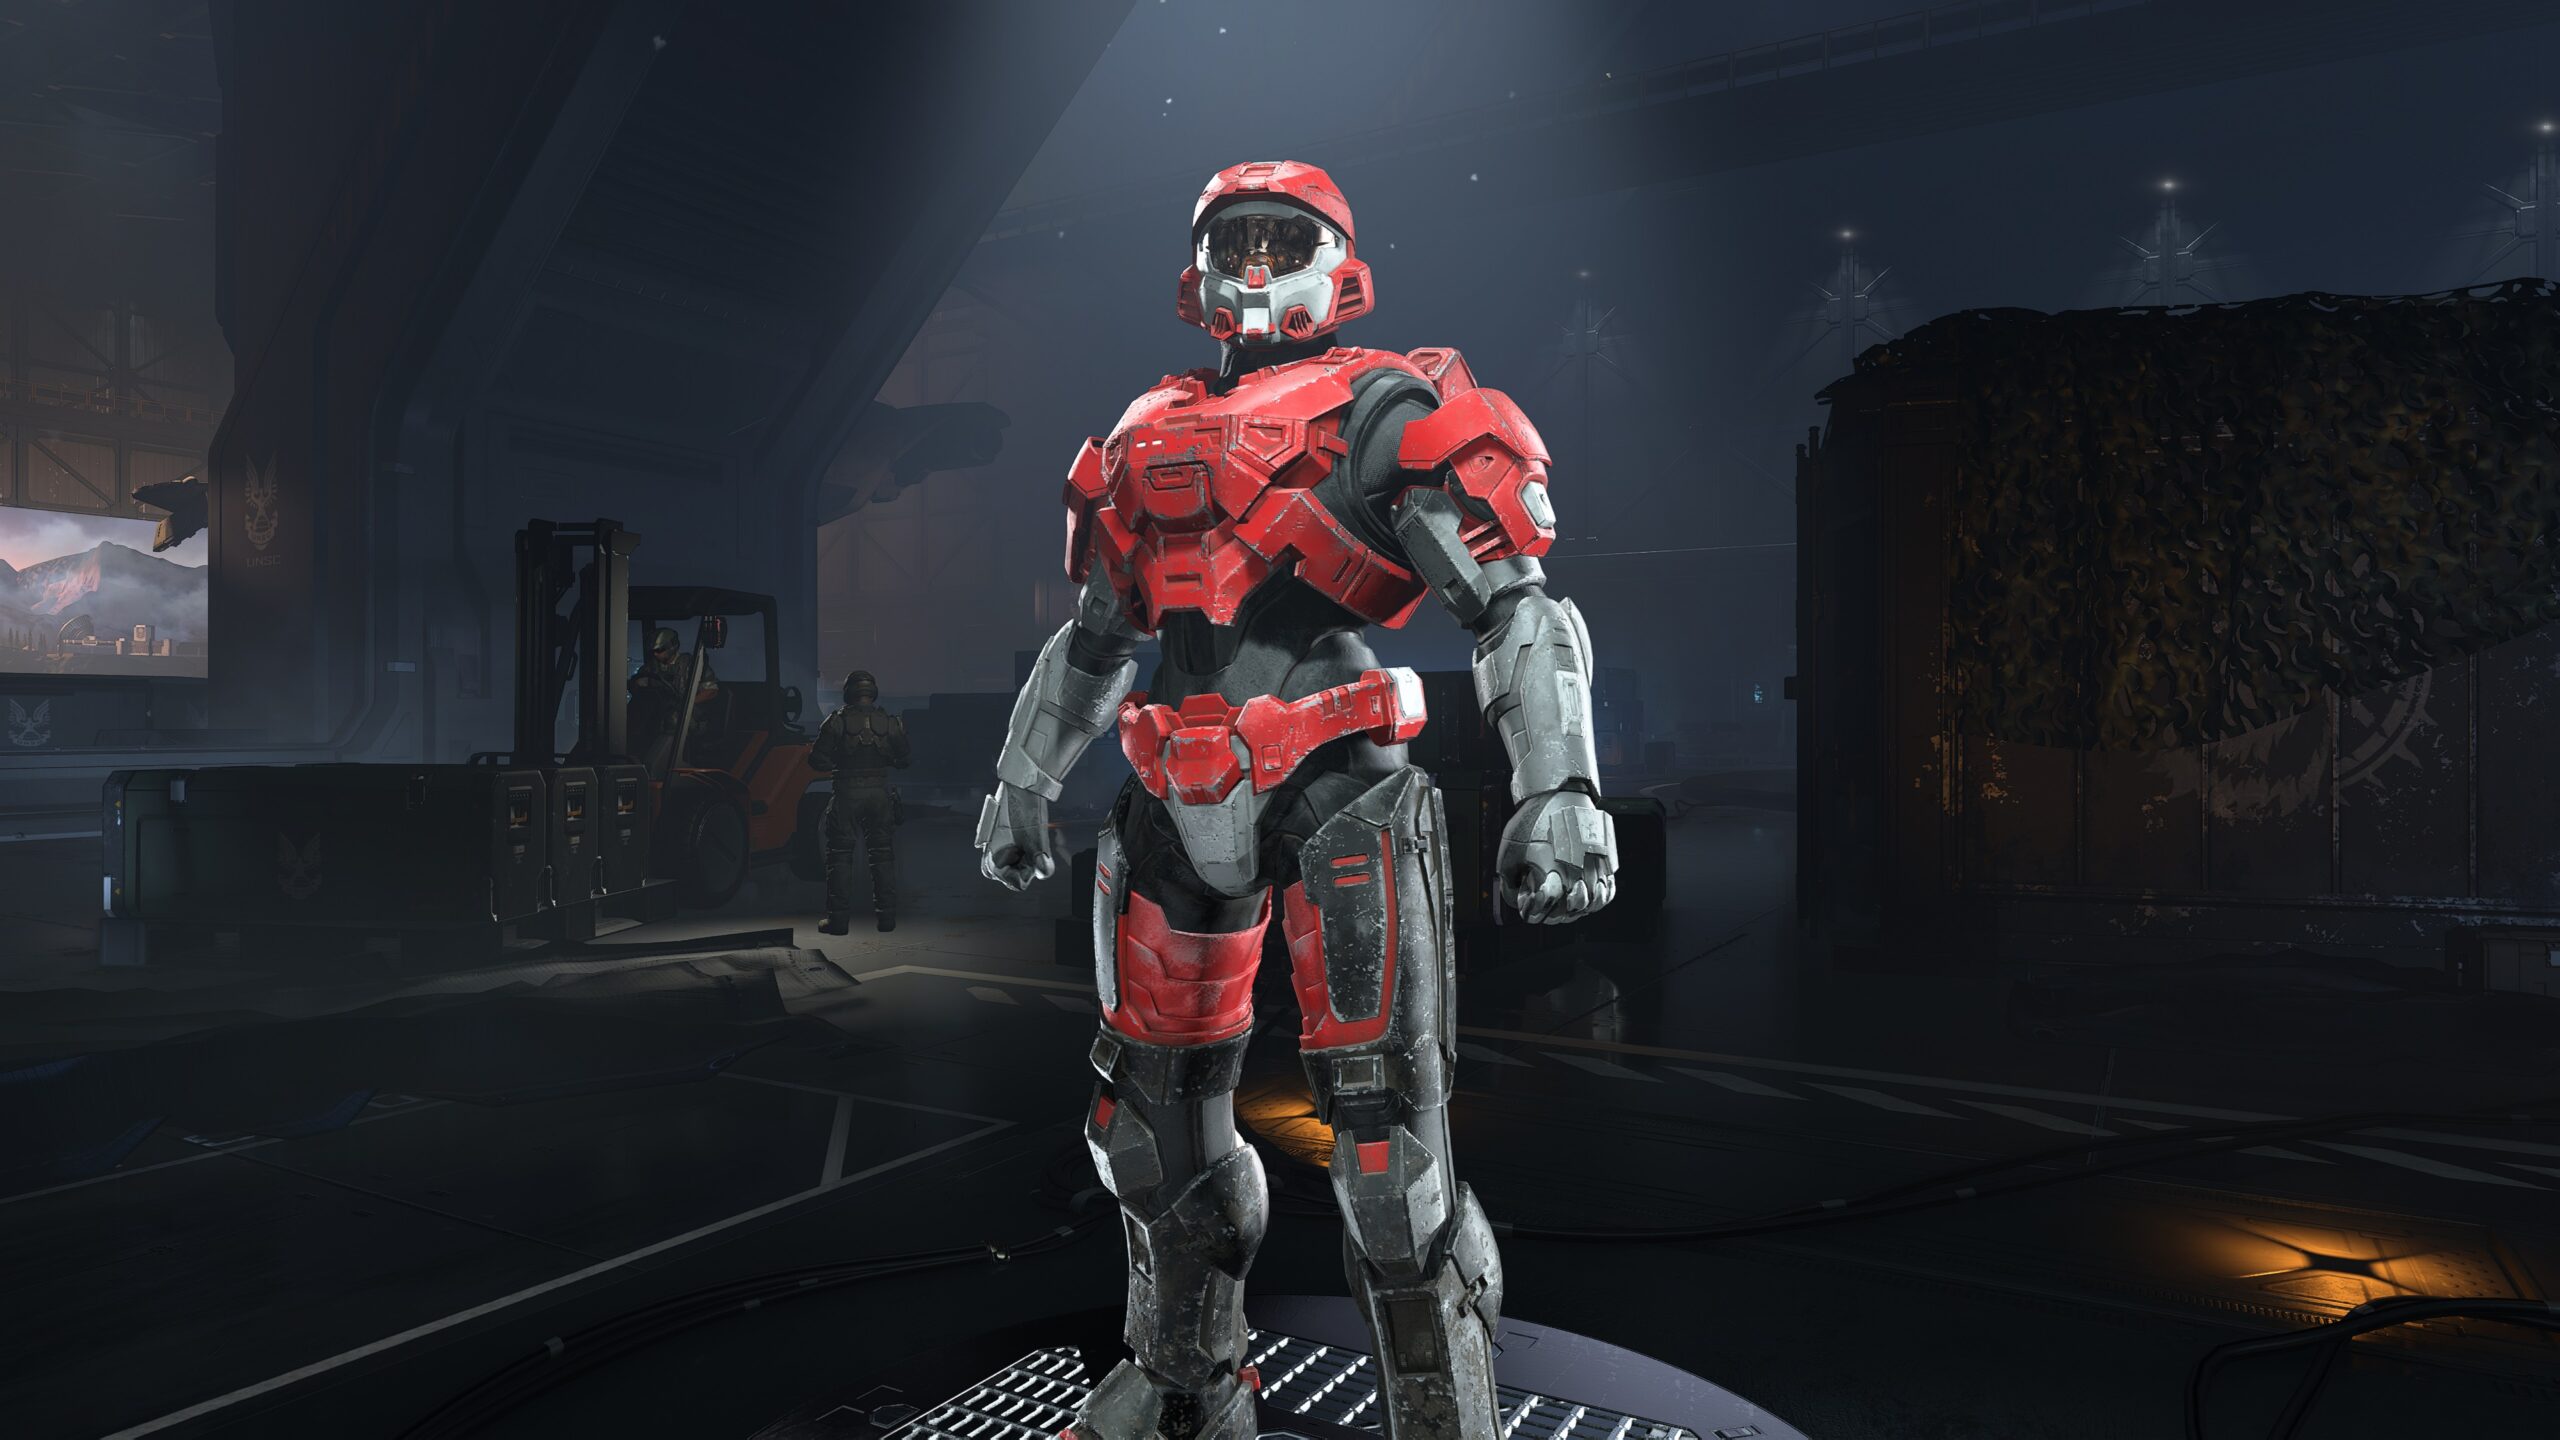 Halo Infinite Shred Shift coating for the MARK VII Armor Core